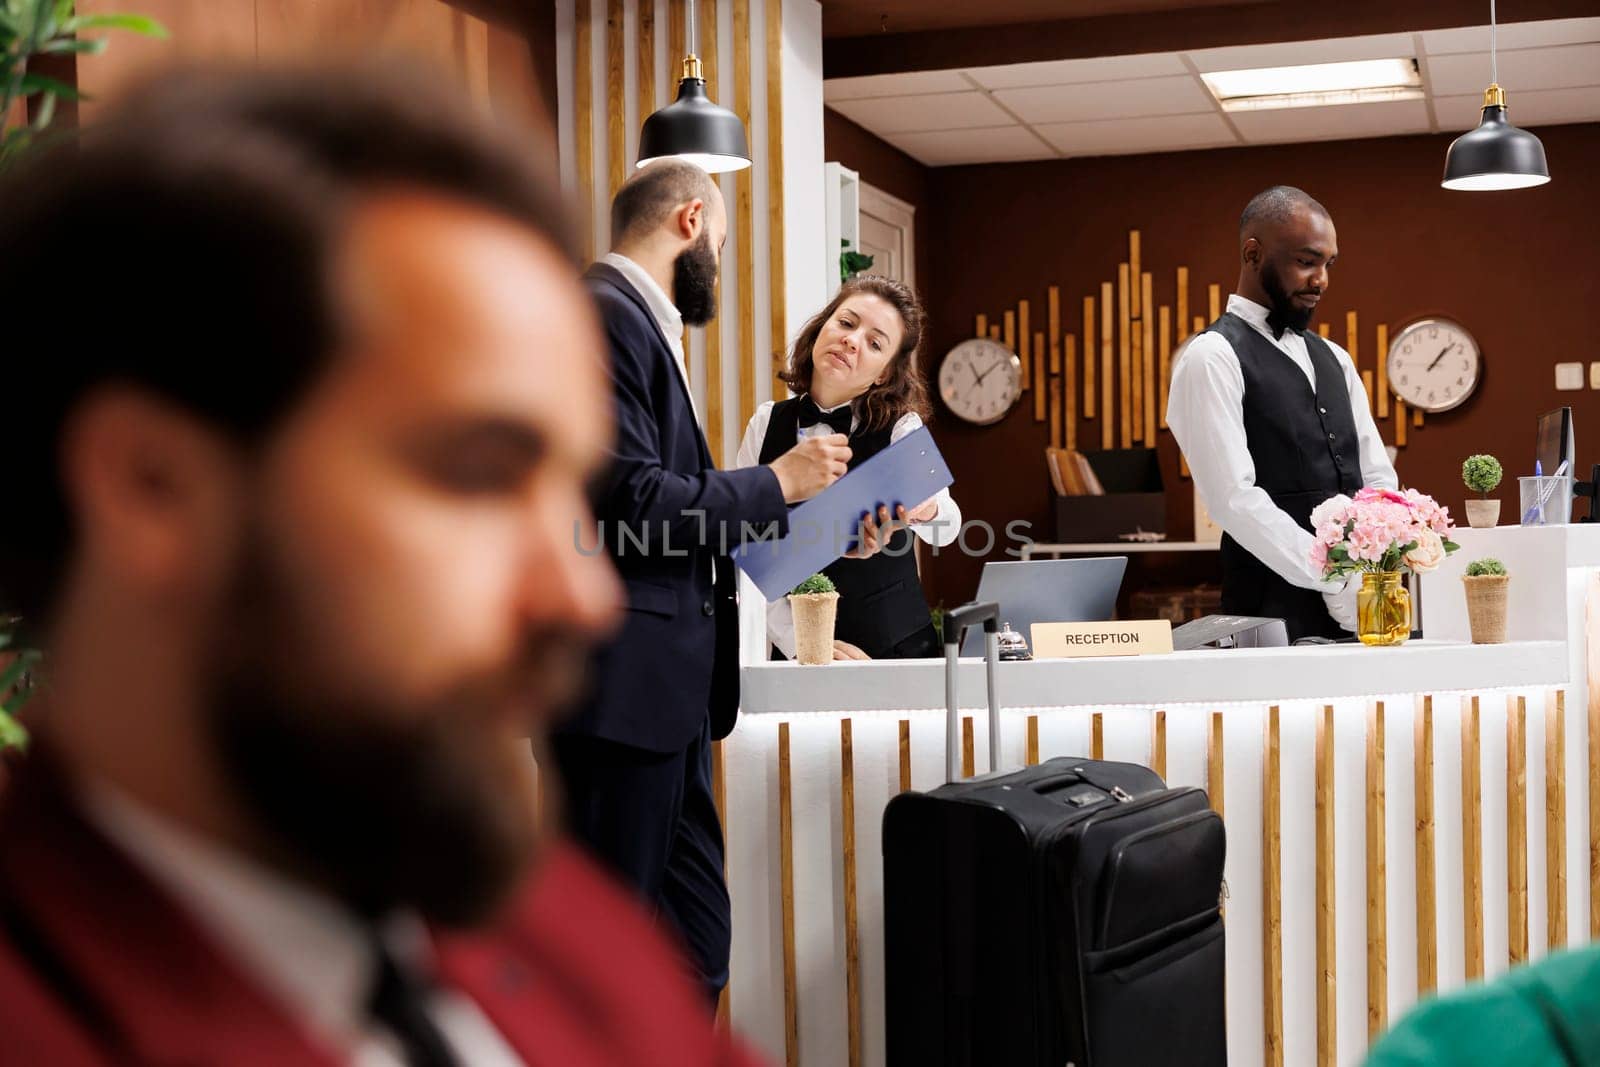 Hotel receptionist doing check in for businessman at front desk, providing luxury concierge services to guest. Client signing papers and travelling for work business meetings abroad.